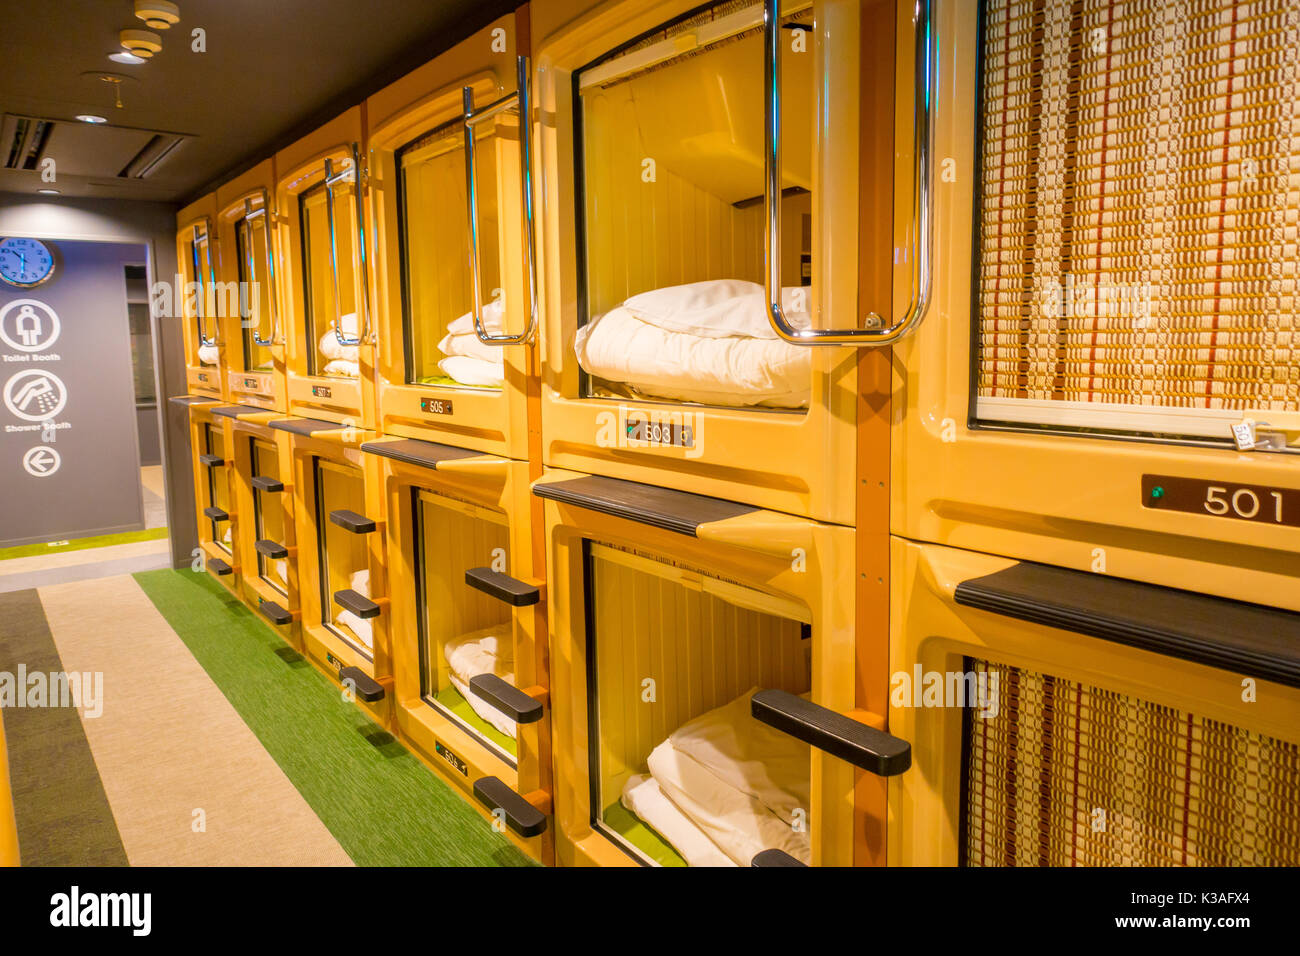 TOKYO, JAPAN JUNE 28 - 2017: Interior view of capsule hotel in city center. Capsule Hotels are less expensive structures very famous in Tokyo Stock Photo